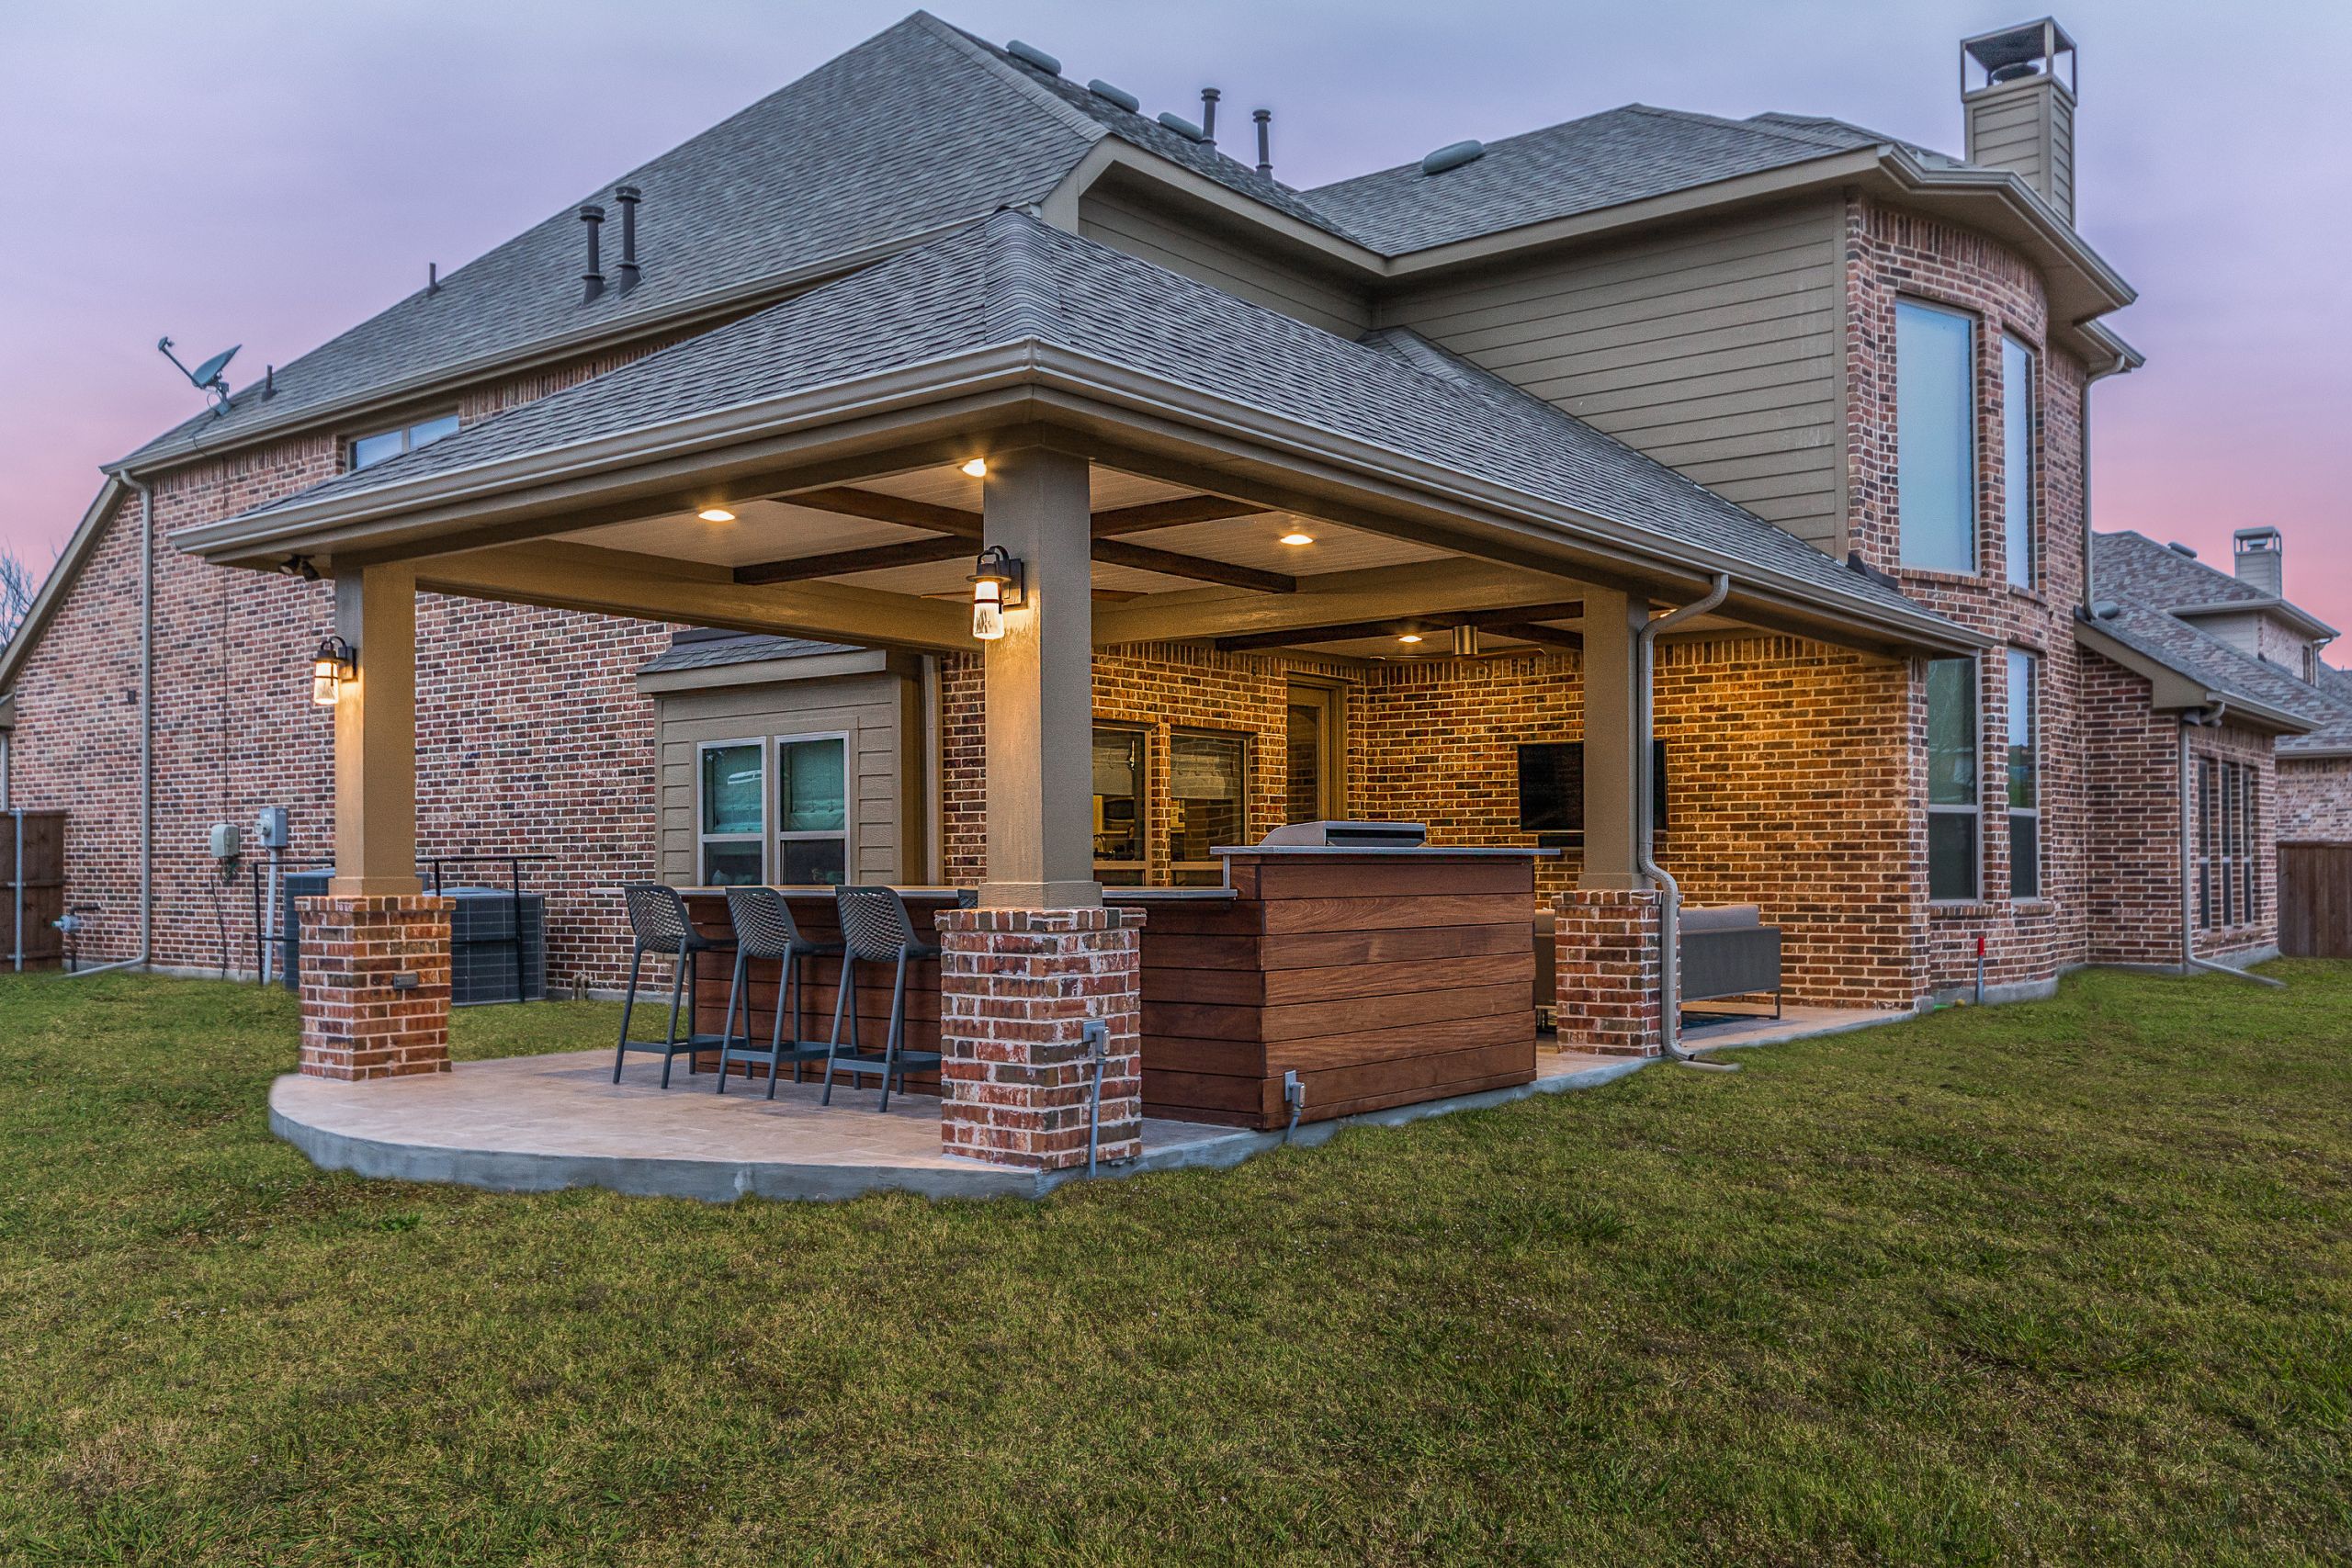 Patio Outdoor Kitchen
 Patio Cover and Outdoor Kitchen in Coppell Texas Custom